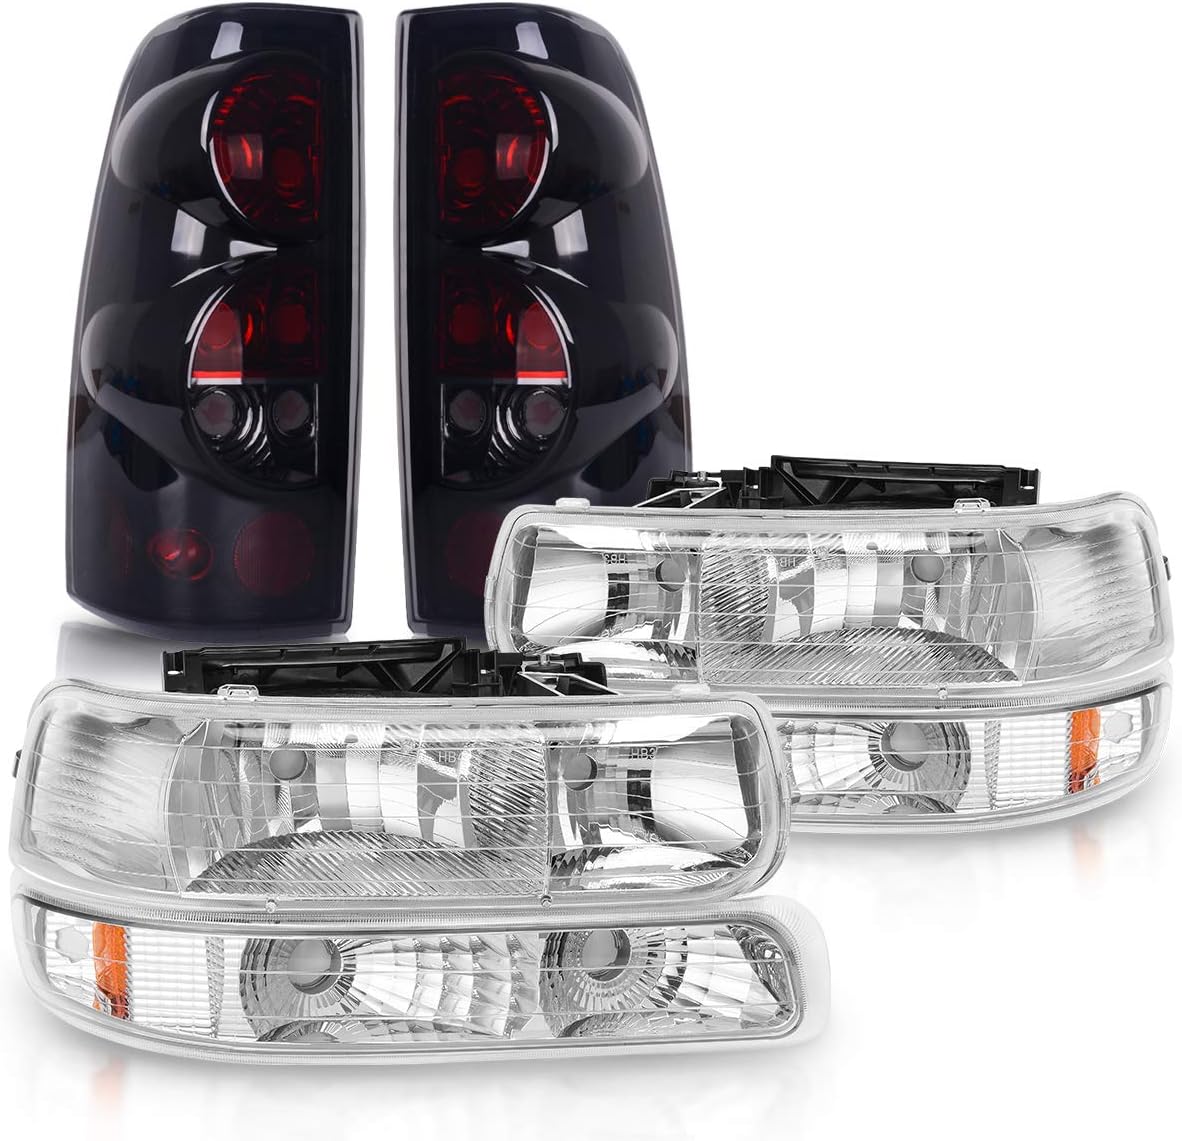 DWVO Headlight Assembly and Taillights Combo Set Compatible with 1999-2002 Chevrolet Silverado 1500/2500 2001-2002 Chevrolet Silverado 1500HD/2500HD/3500, Chrome Housing Headlamps Replacement